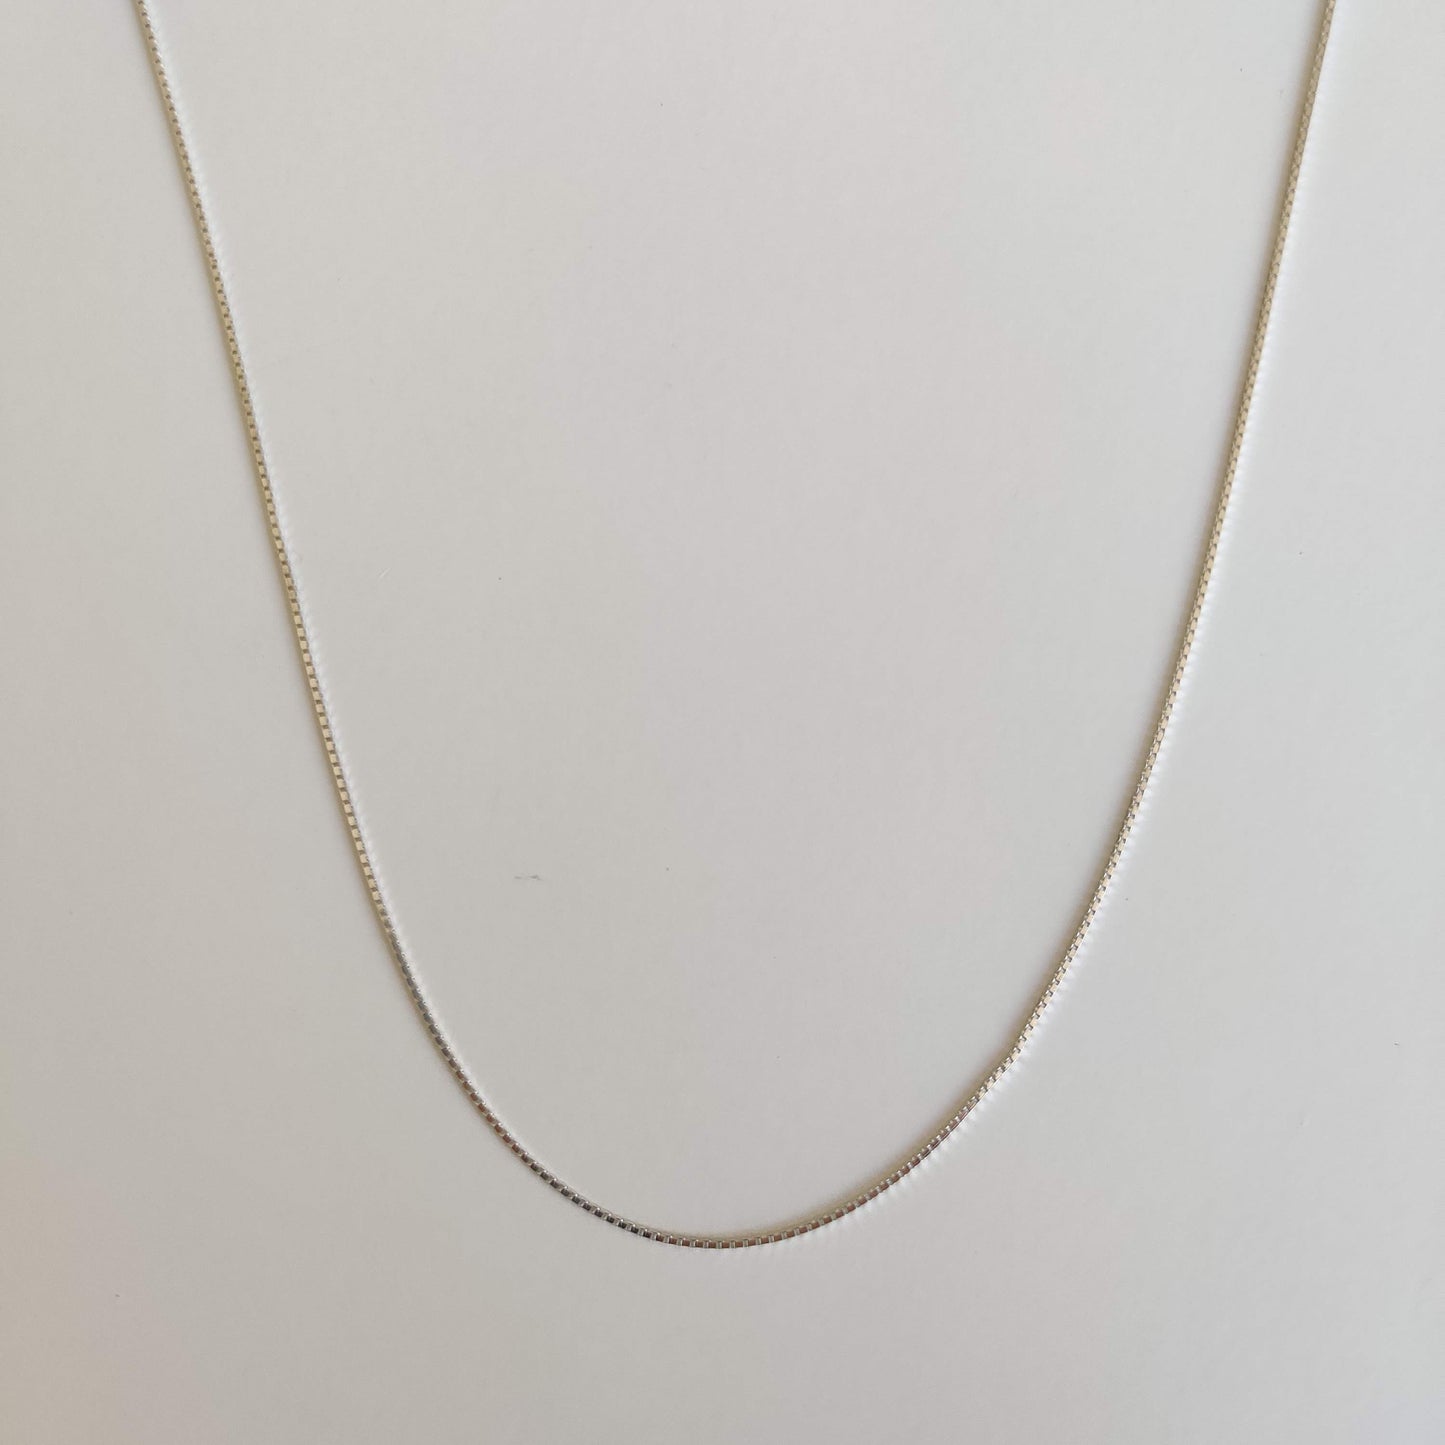 Sterling Silver 925 Box Chain Necklace - Rivendell Shop